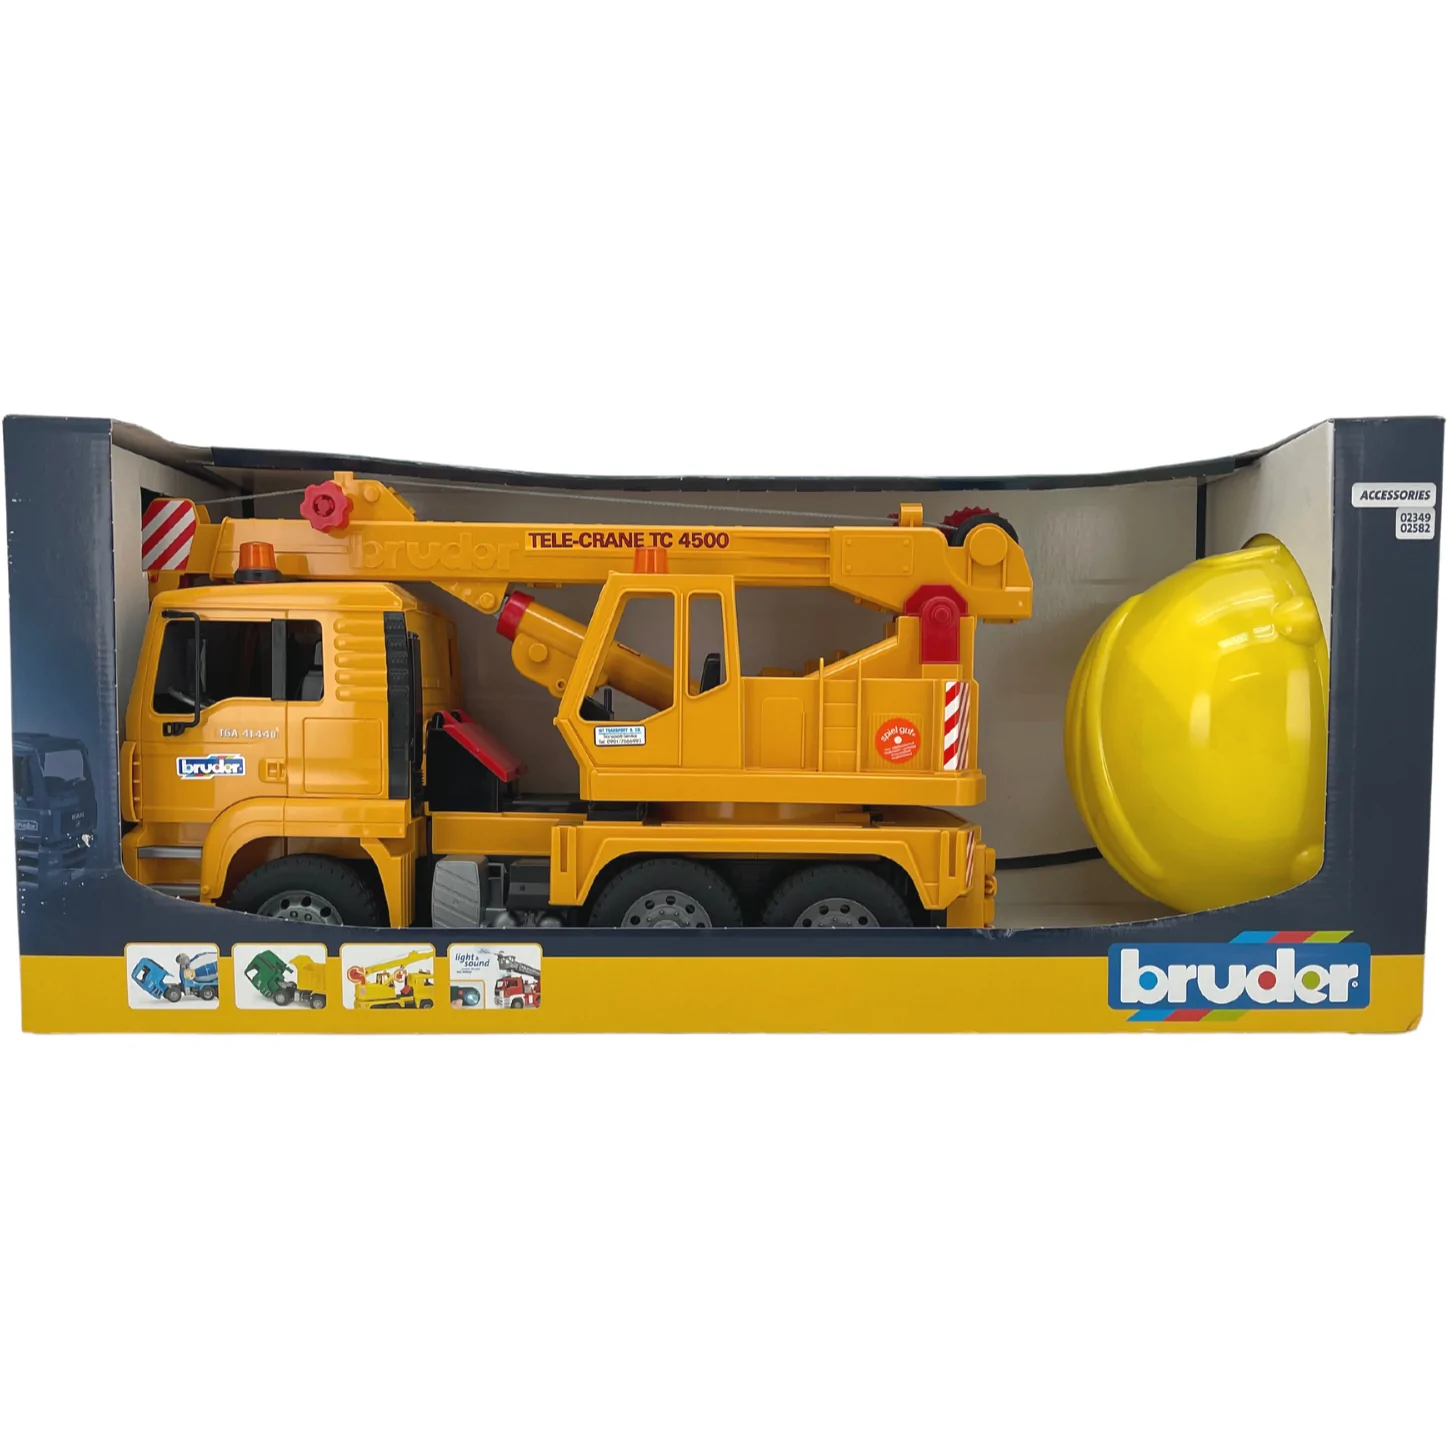 Bruder Tele-Crane TC 4500 with Hard Hat / Large Toy / Construction Toy **DEALS**